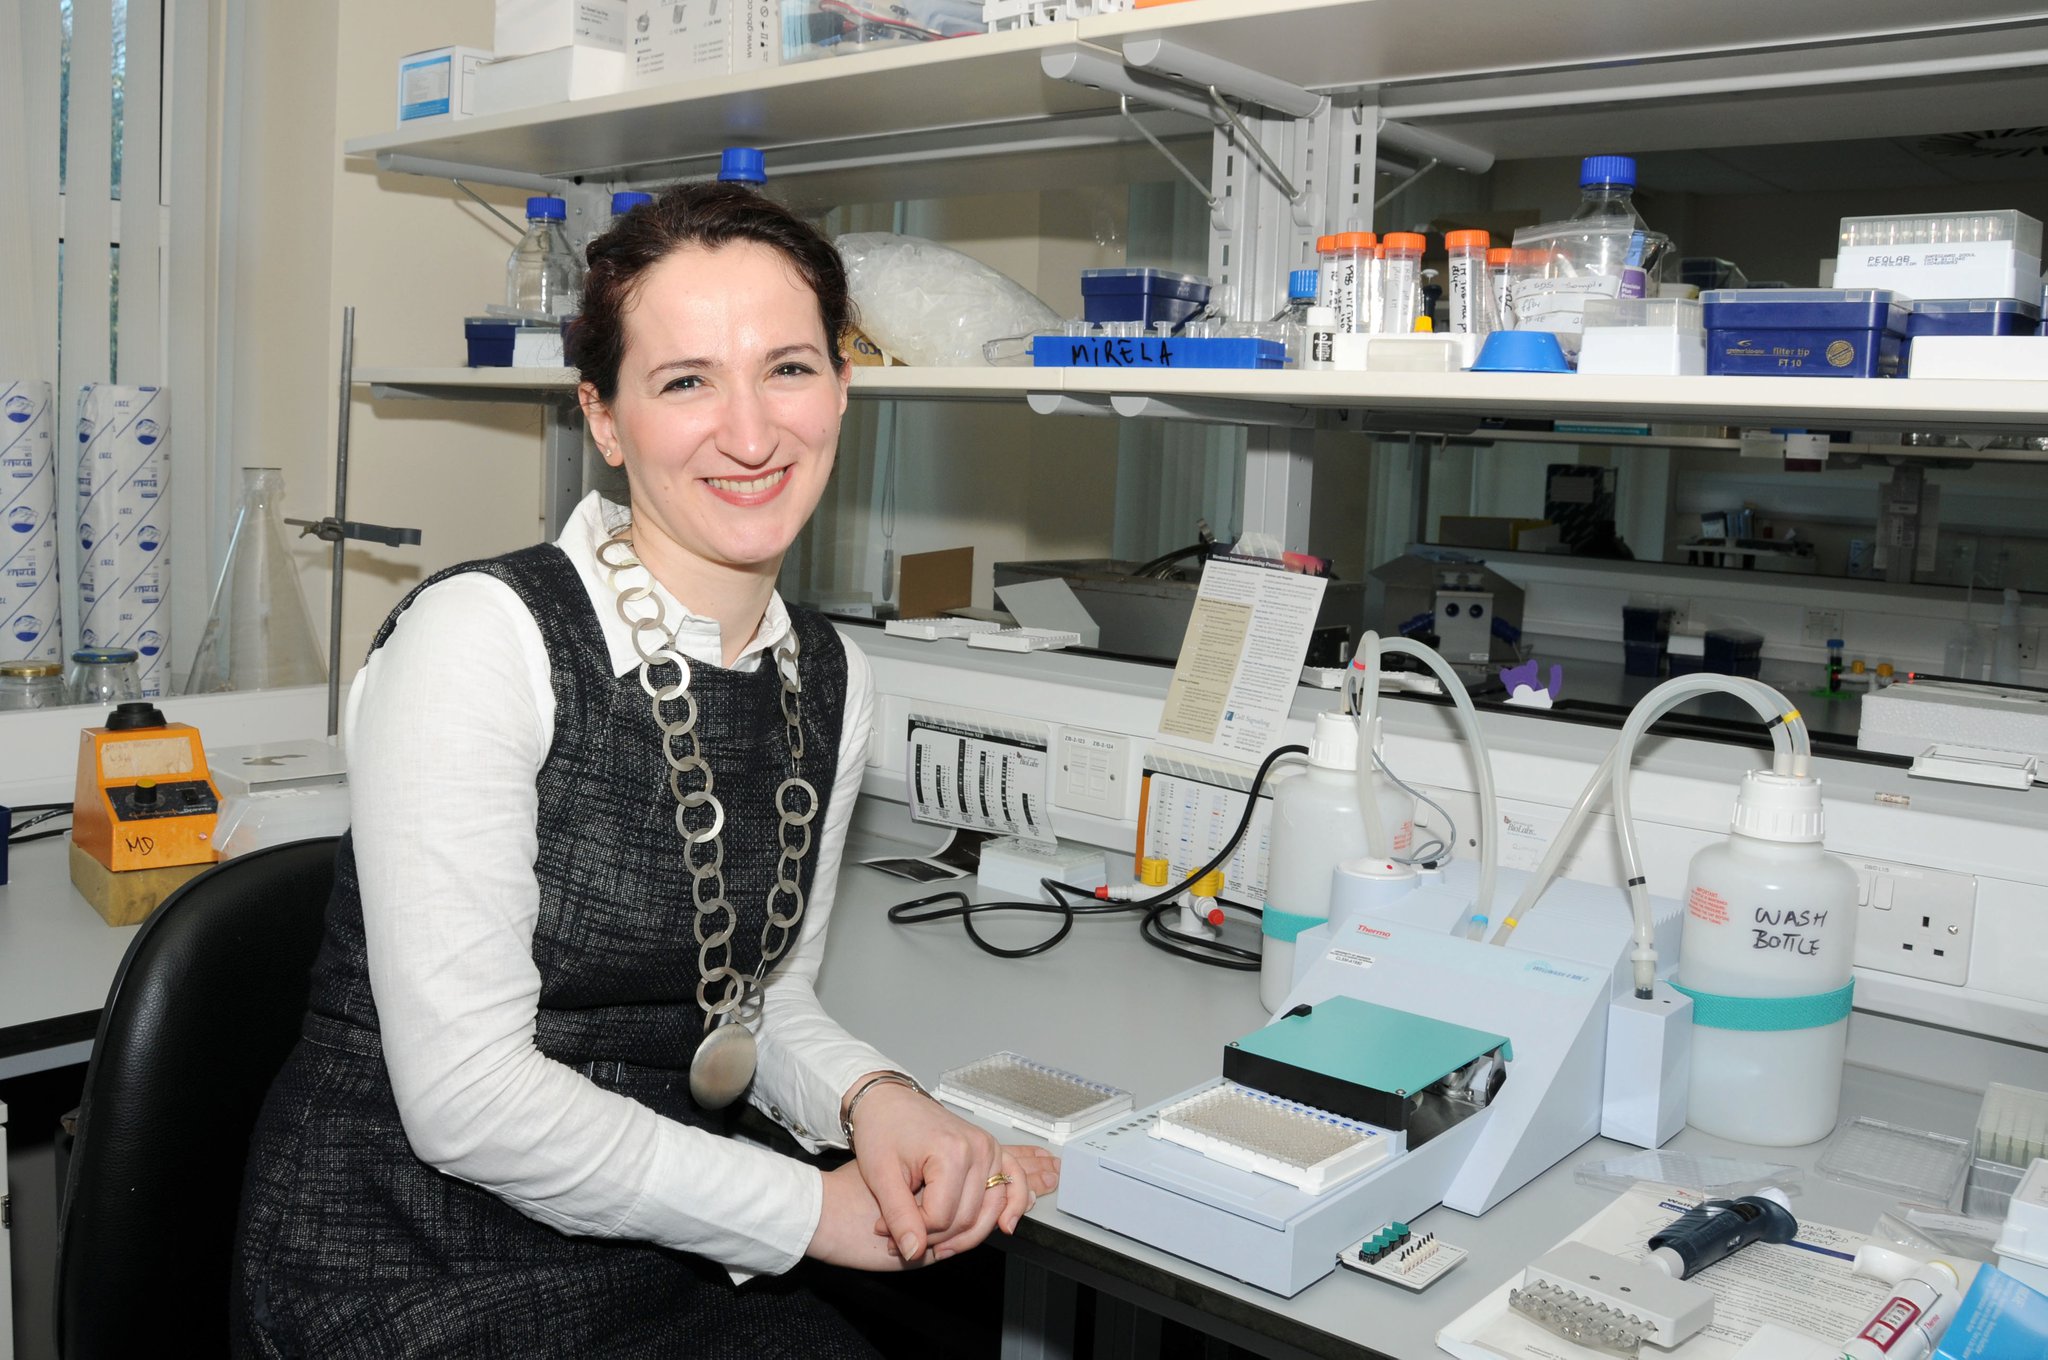 Mirela Delibegovic will lead the research at Aberdeen University.